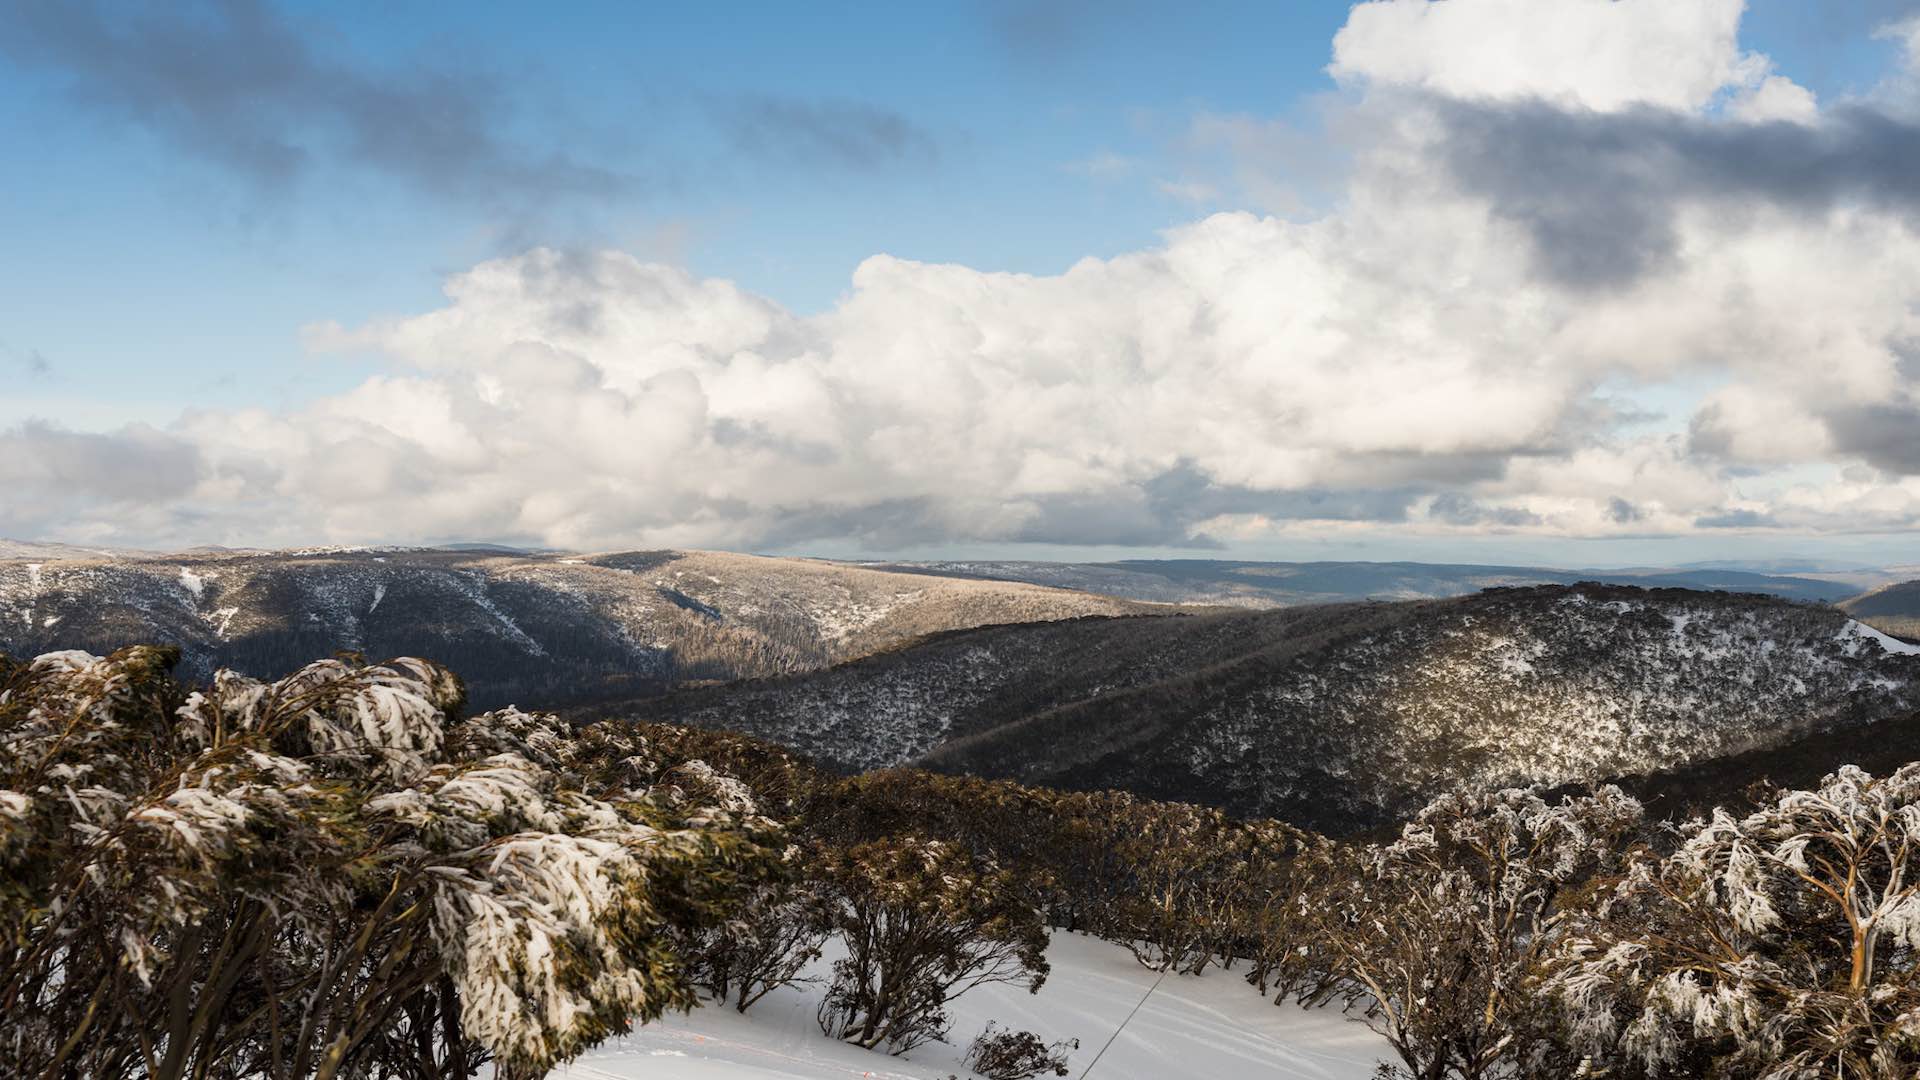 NSW and Victoria's Alpine Regions Have Been Experiencing a Stint of Summer Snow